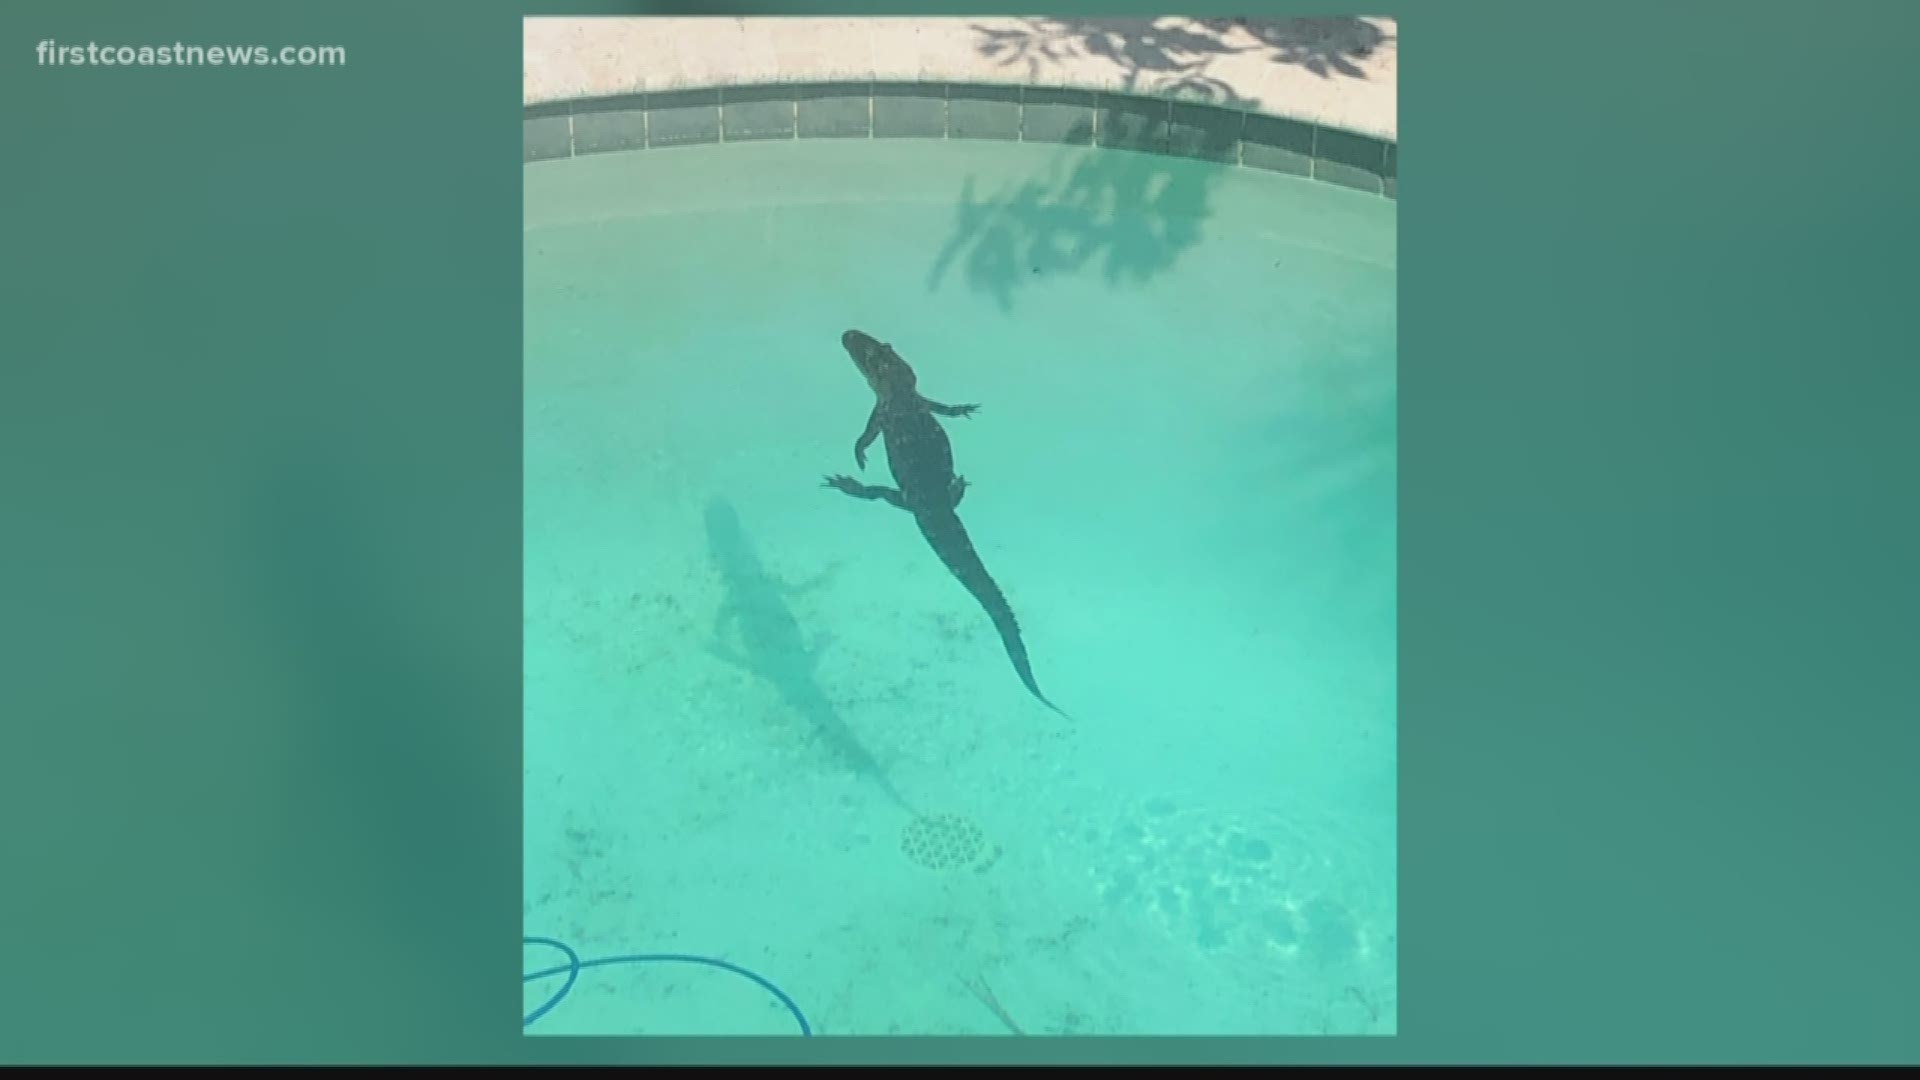 Deputies are warning residents to be careful when getting in their pools and to make sure there are no unwelcome creatures swimming around.